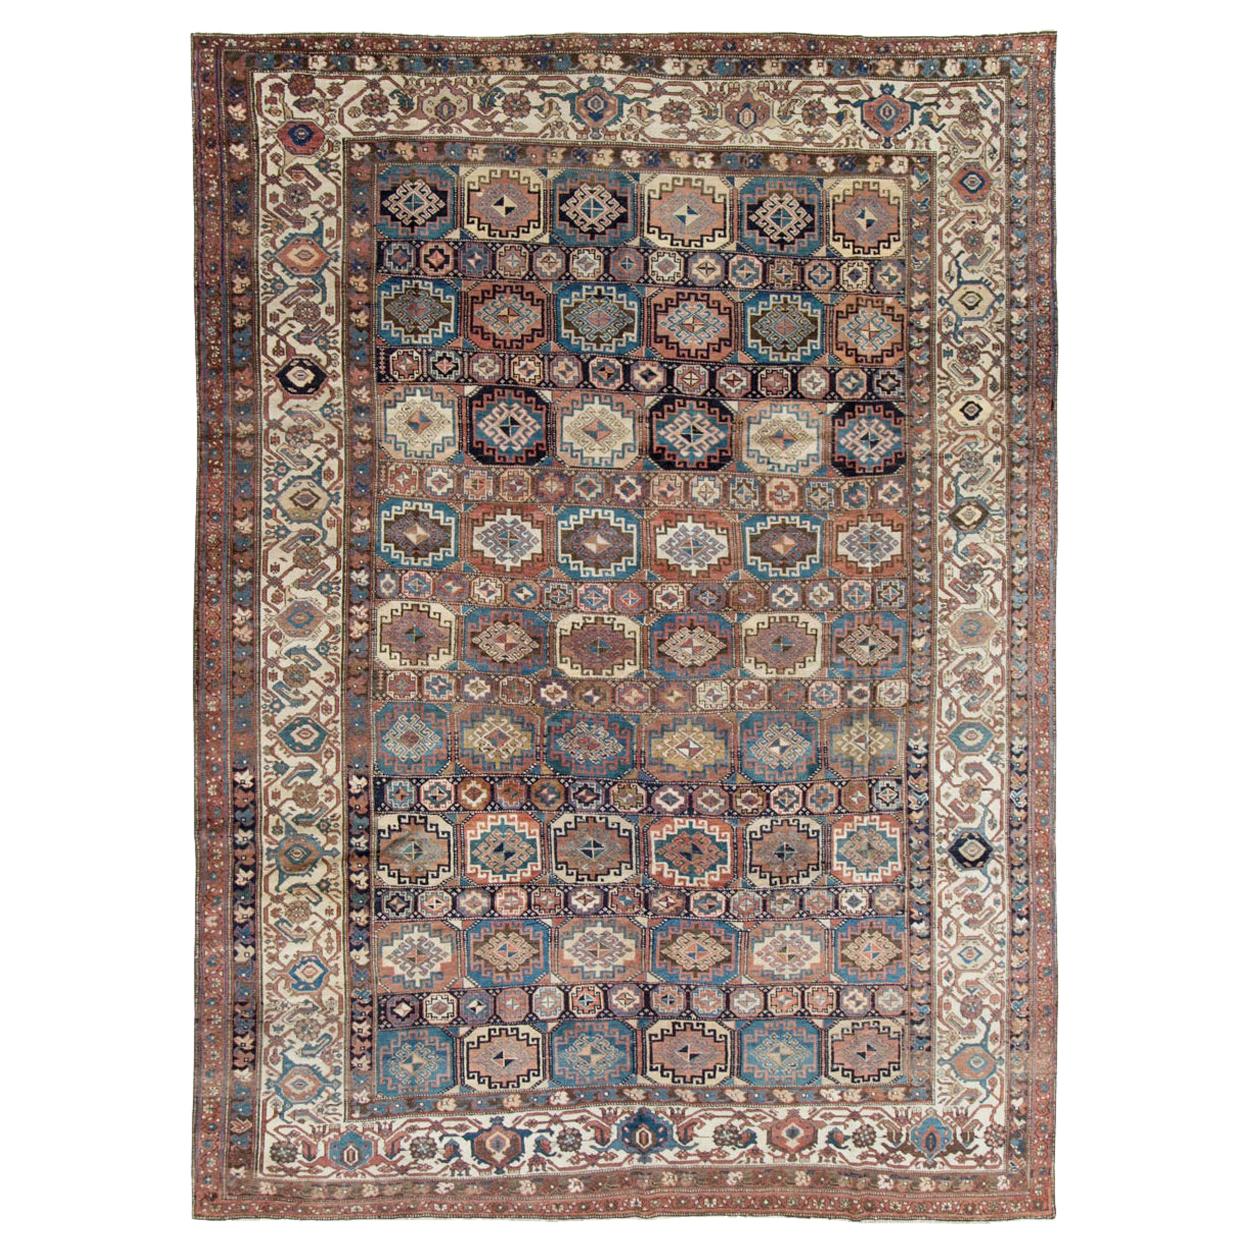 Early 20th Century Handmade Northwest Persian Room Size Carpet For Sale